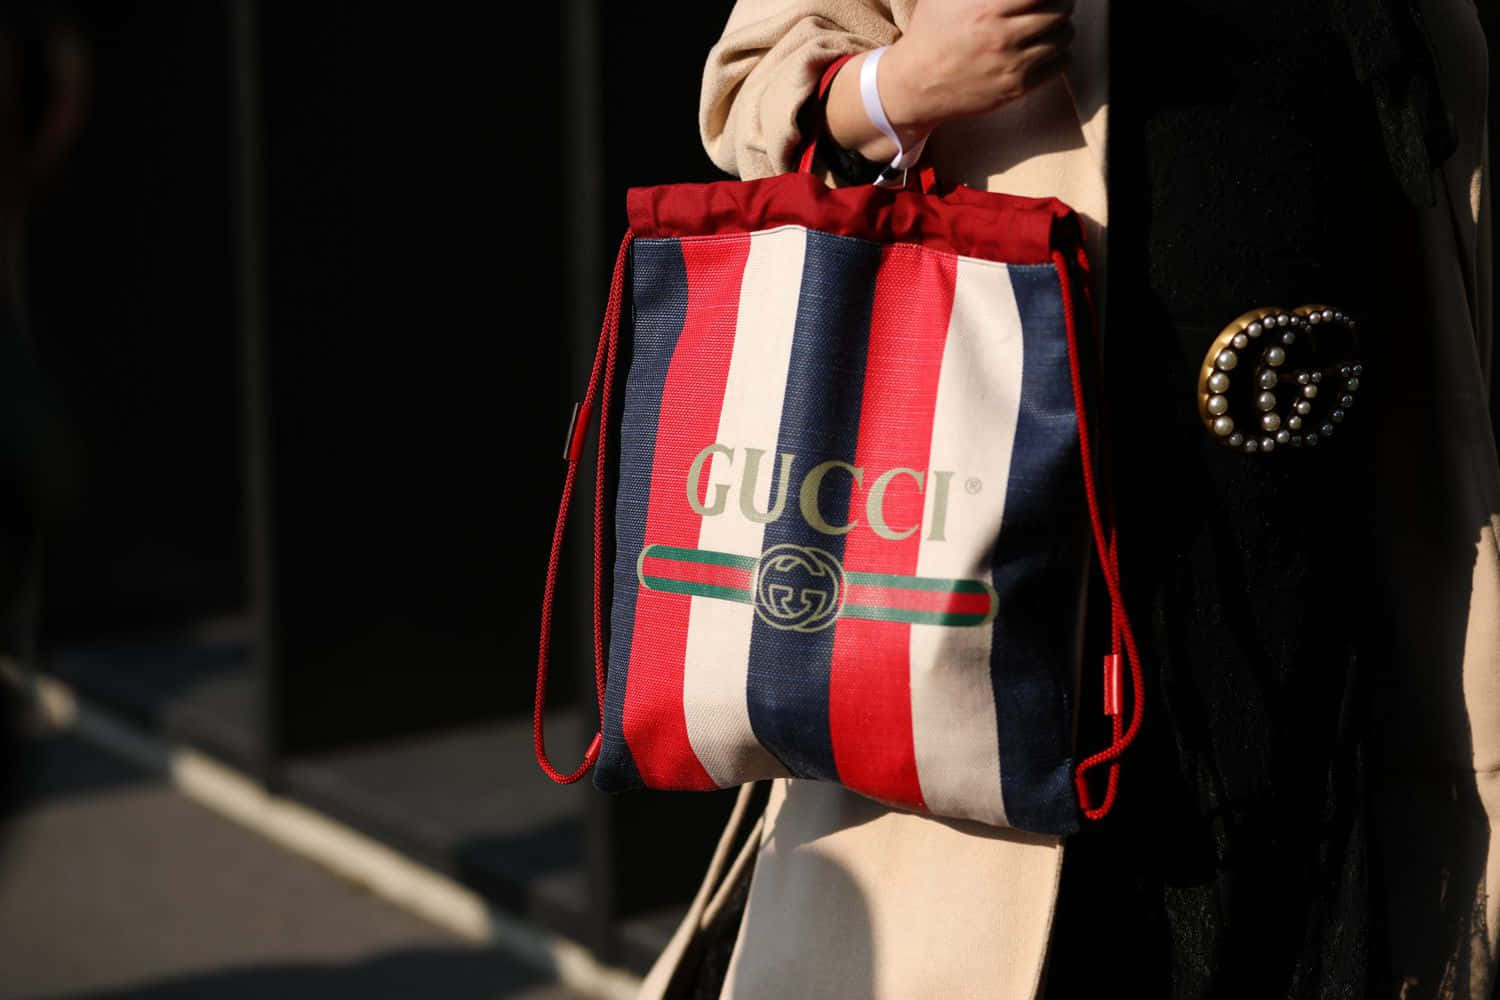 Make a statement in the iconic luxury style of Gucci.